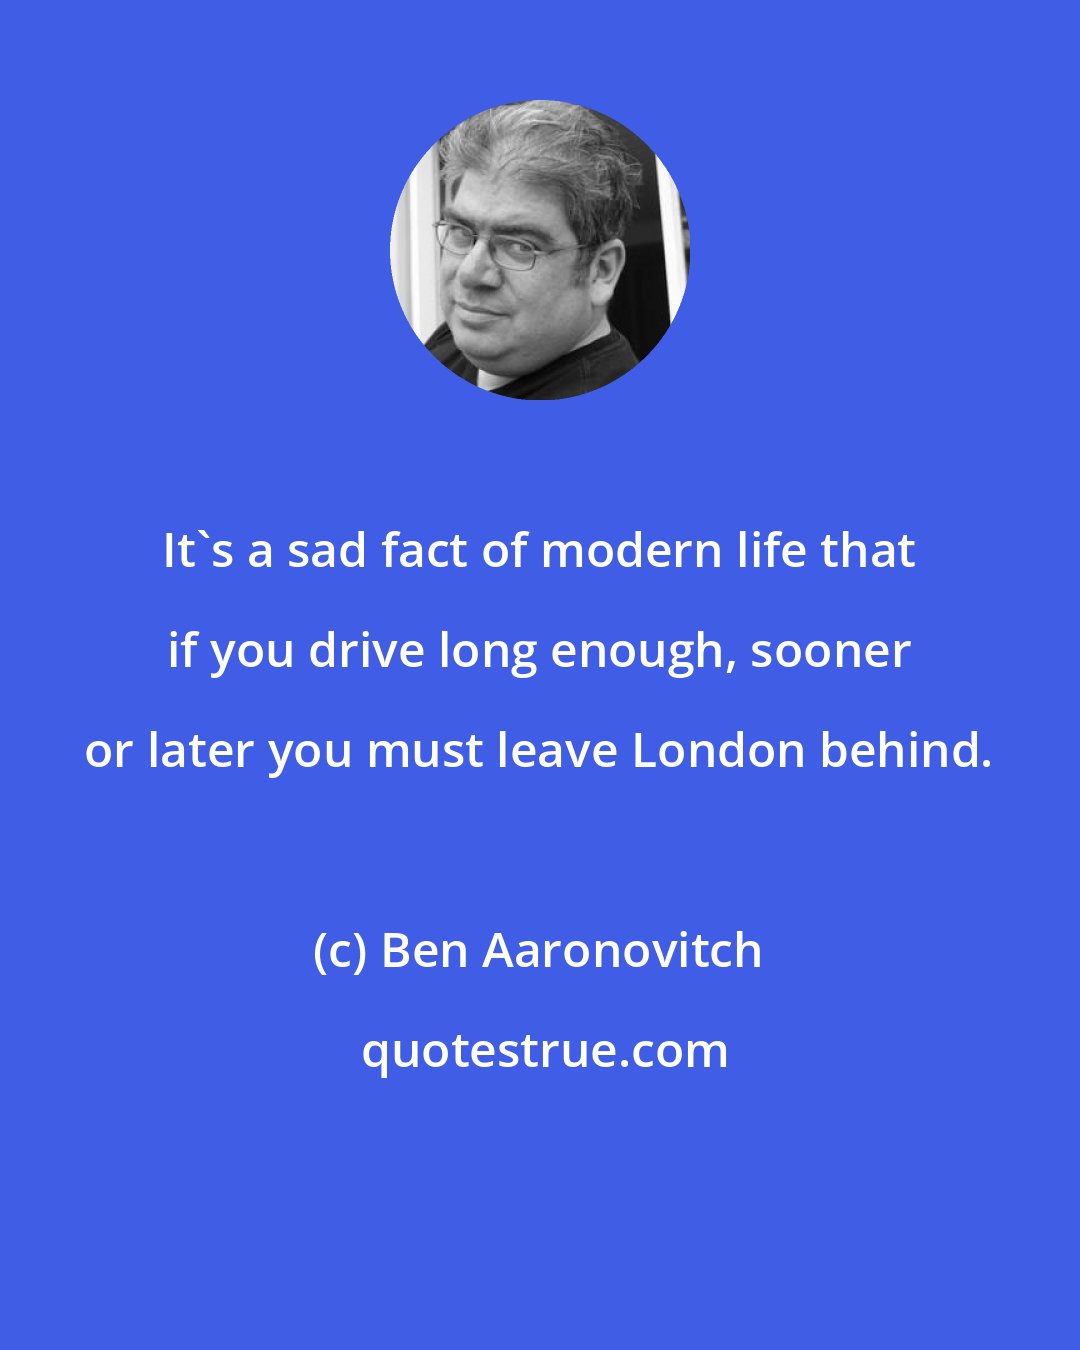 Ben Aaronovitch: It's a sad fact of modern life that if you drive long enough, sooner or later you must leave London behind.